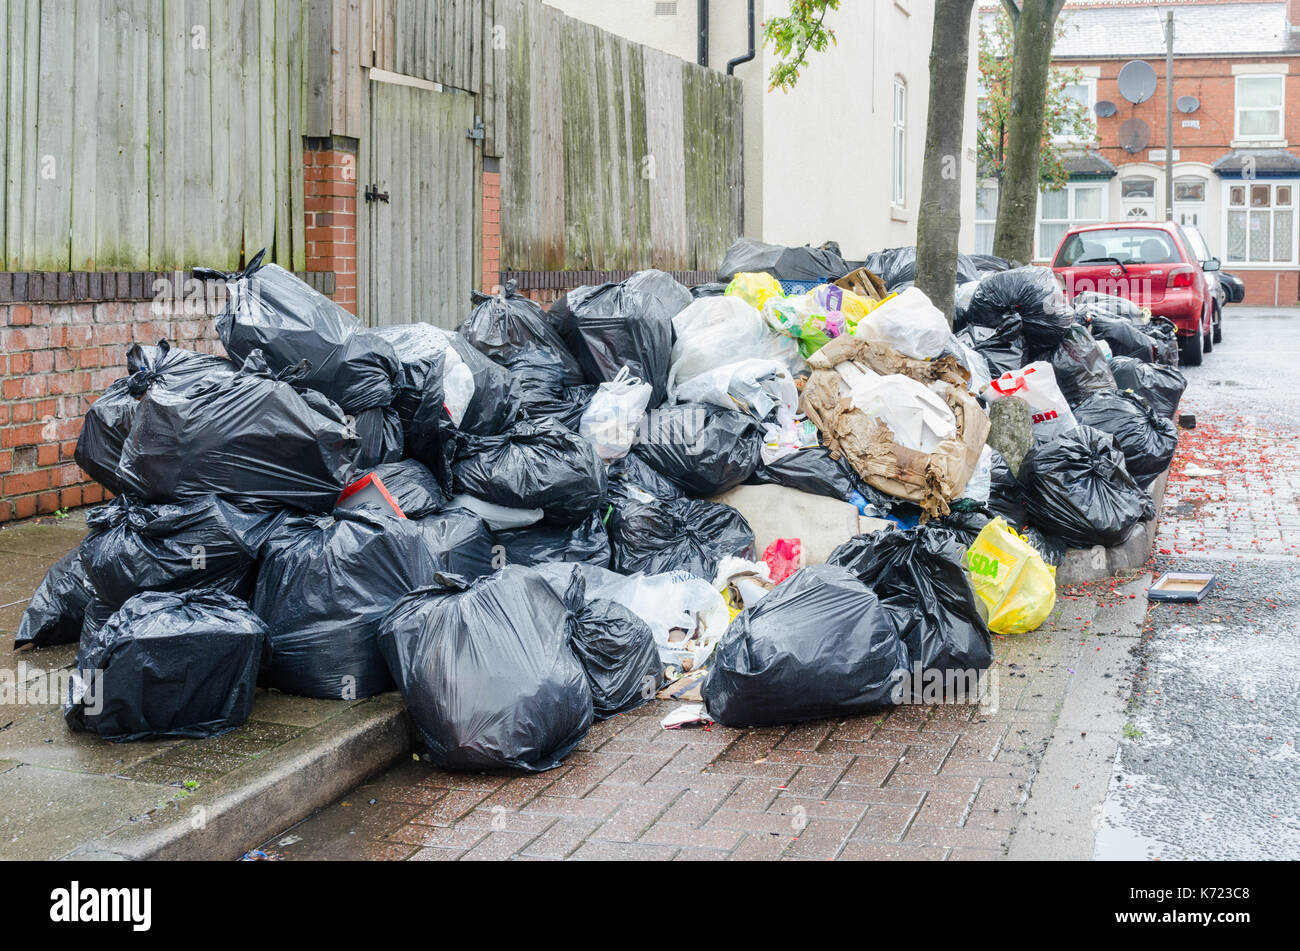 Sparkhill, Birmingham, UK. 14th September 2017. As the long running dispute between refuse collectors and Birmingham City Council shows no sign of ending piles of rubbish continue to grow on the streets.Credit: Nick Maslen/Alamy Live News Stock Photo